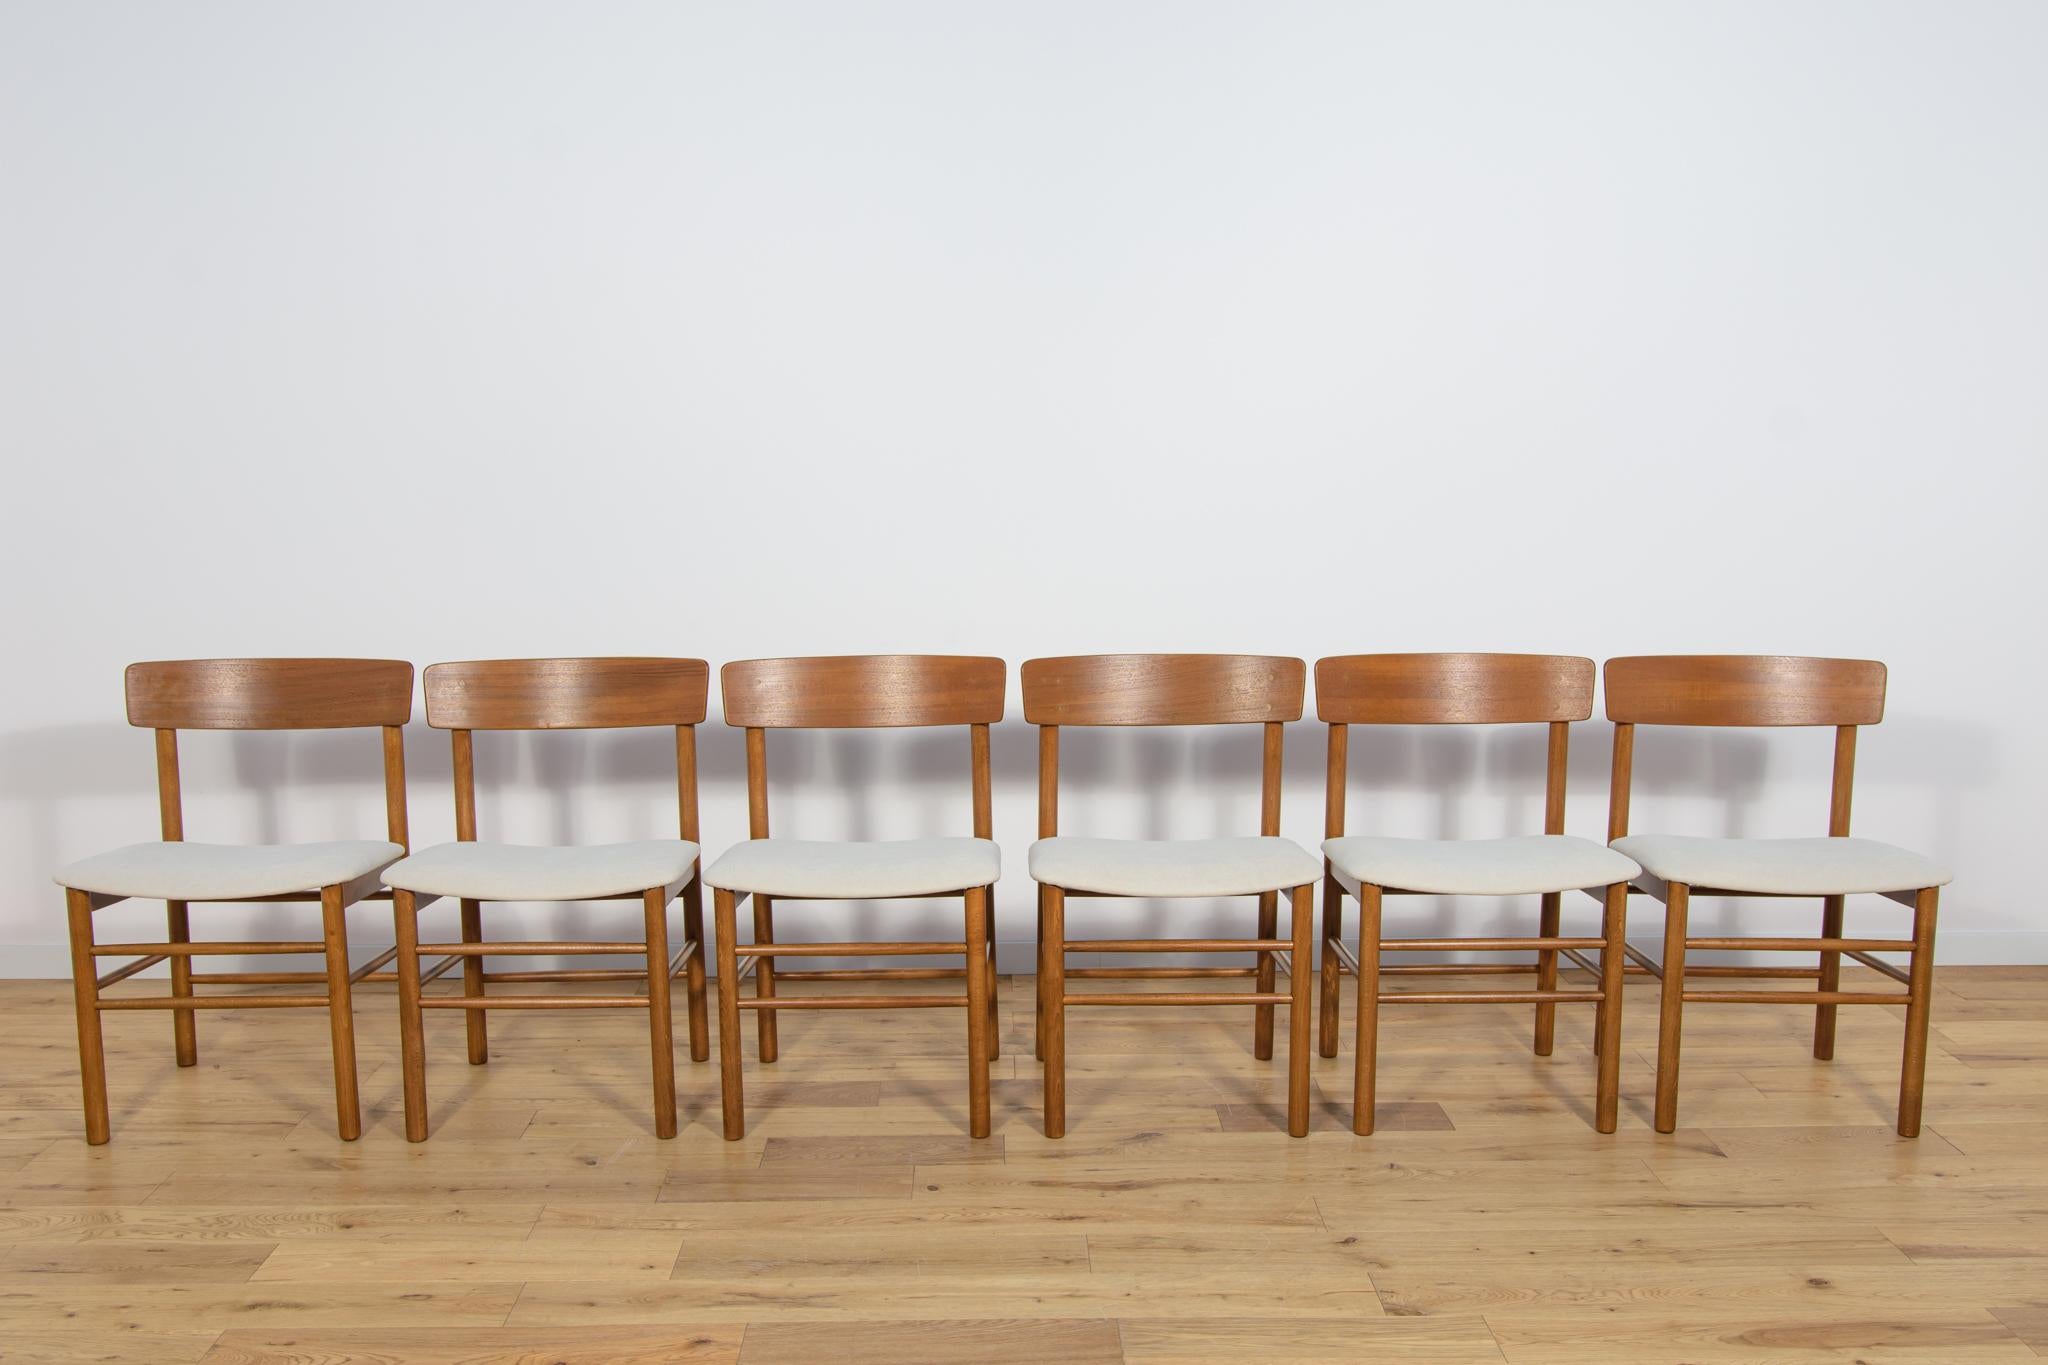 A set of six dining chairs Model J39 designed by one of the most important Danish designers Børge Mogensen for Farstrup in the 1950s. Chairs after comprehensive carpentry and upholstery renovation. The frame is made of beech wood, the backrests are